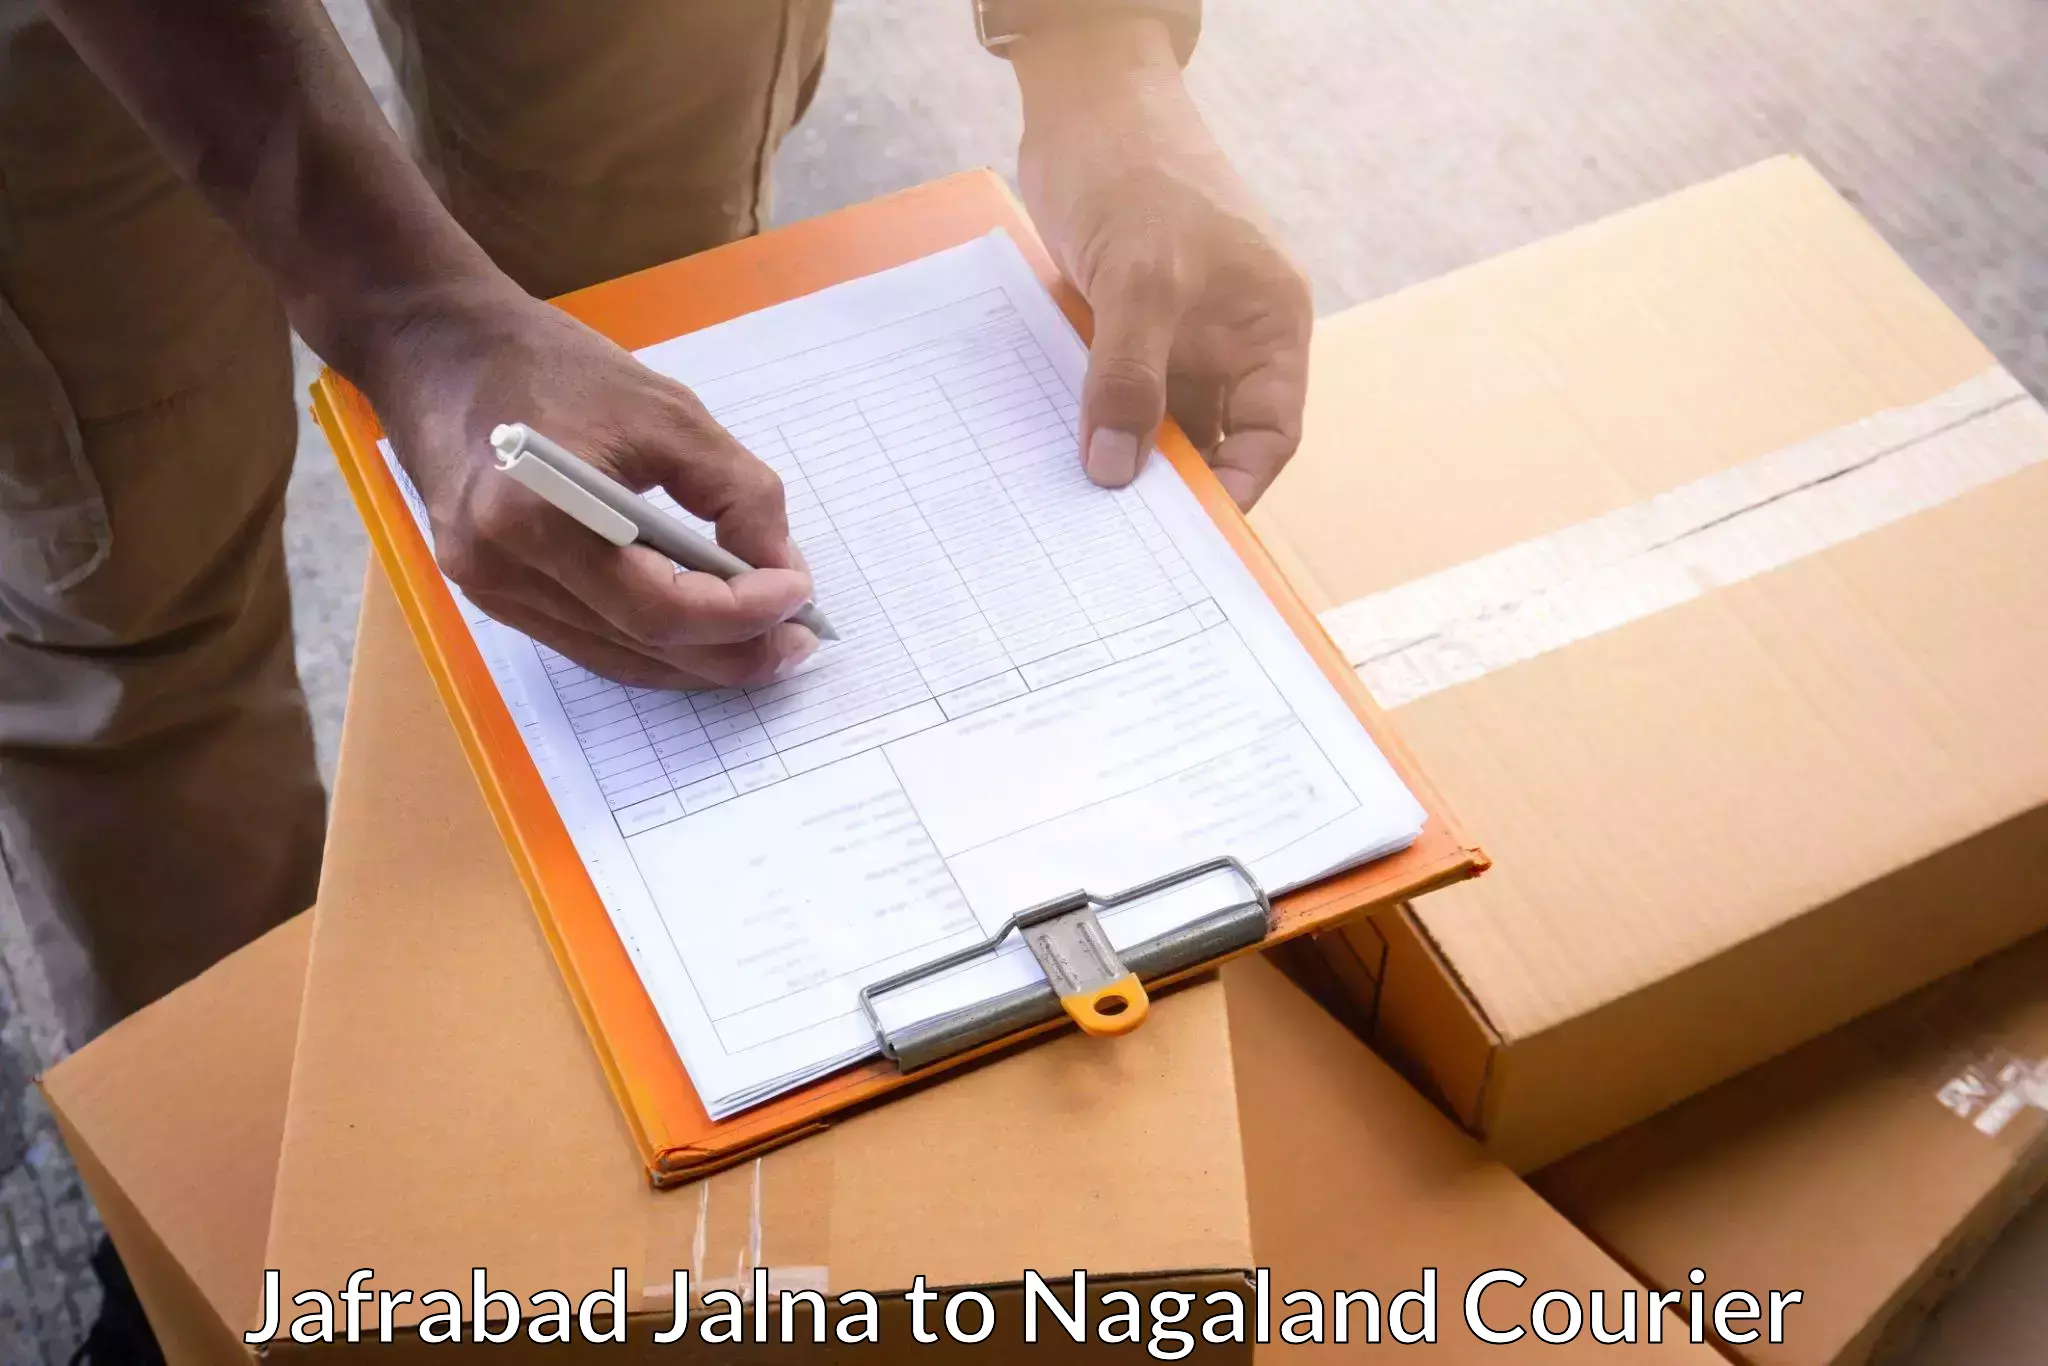 Courier service booking in Jafrabad Jalna to Dimapur